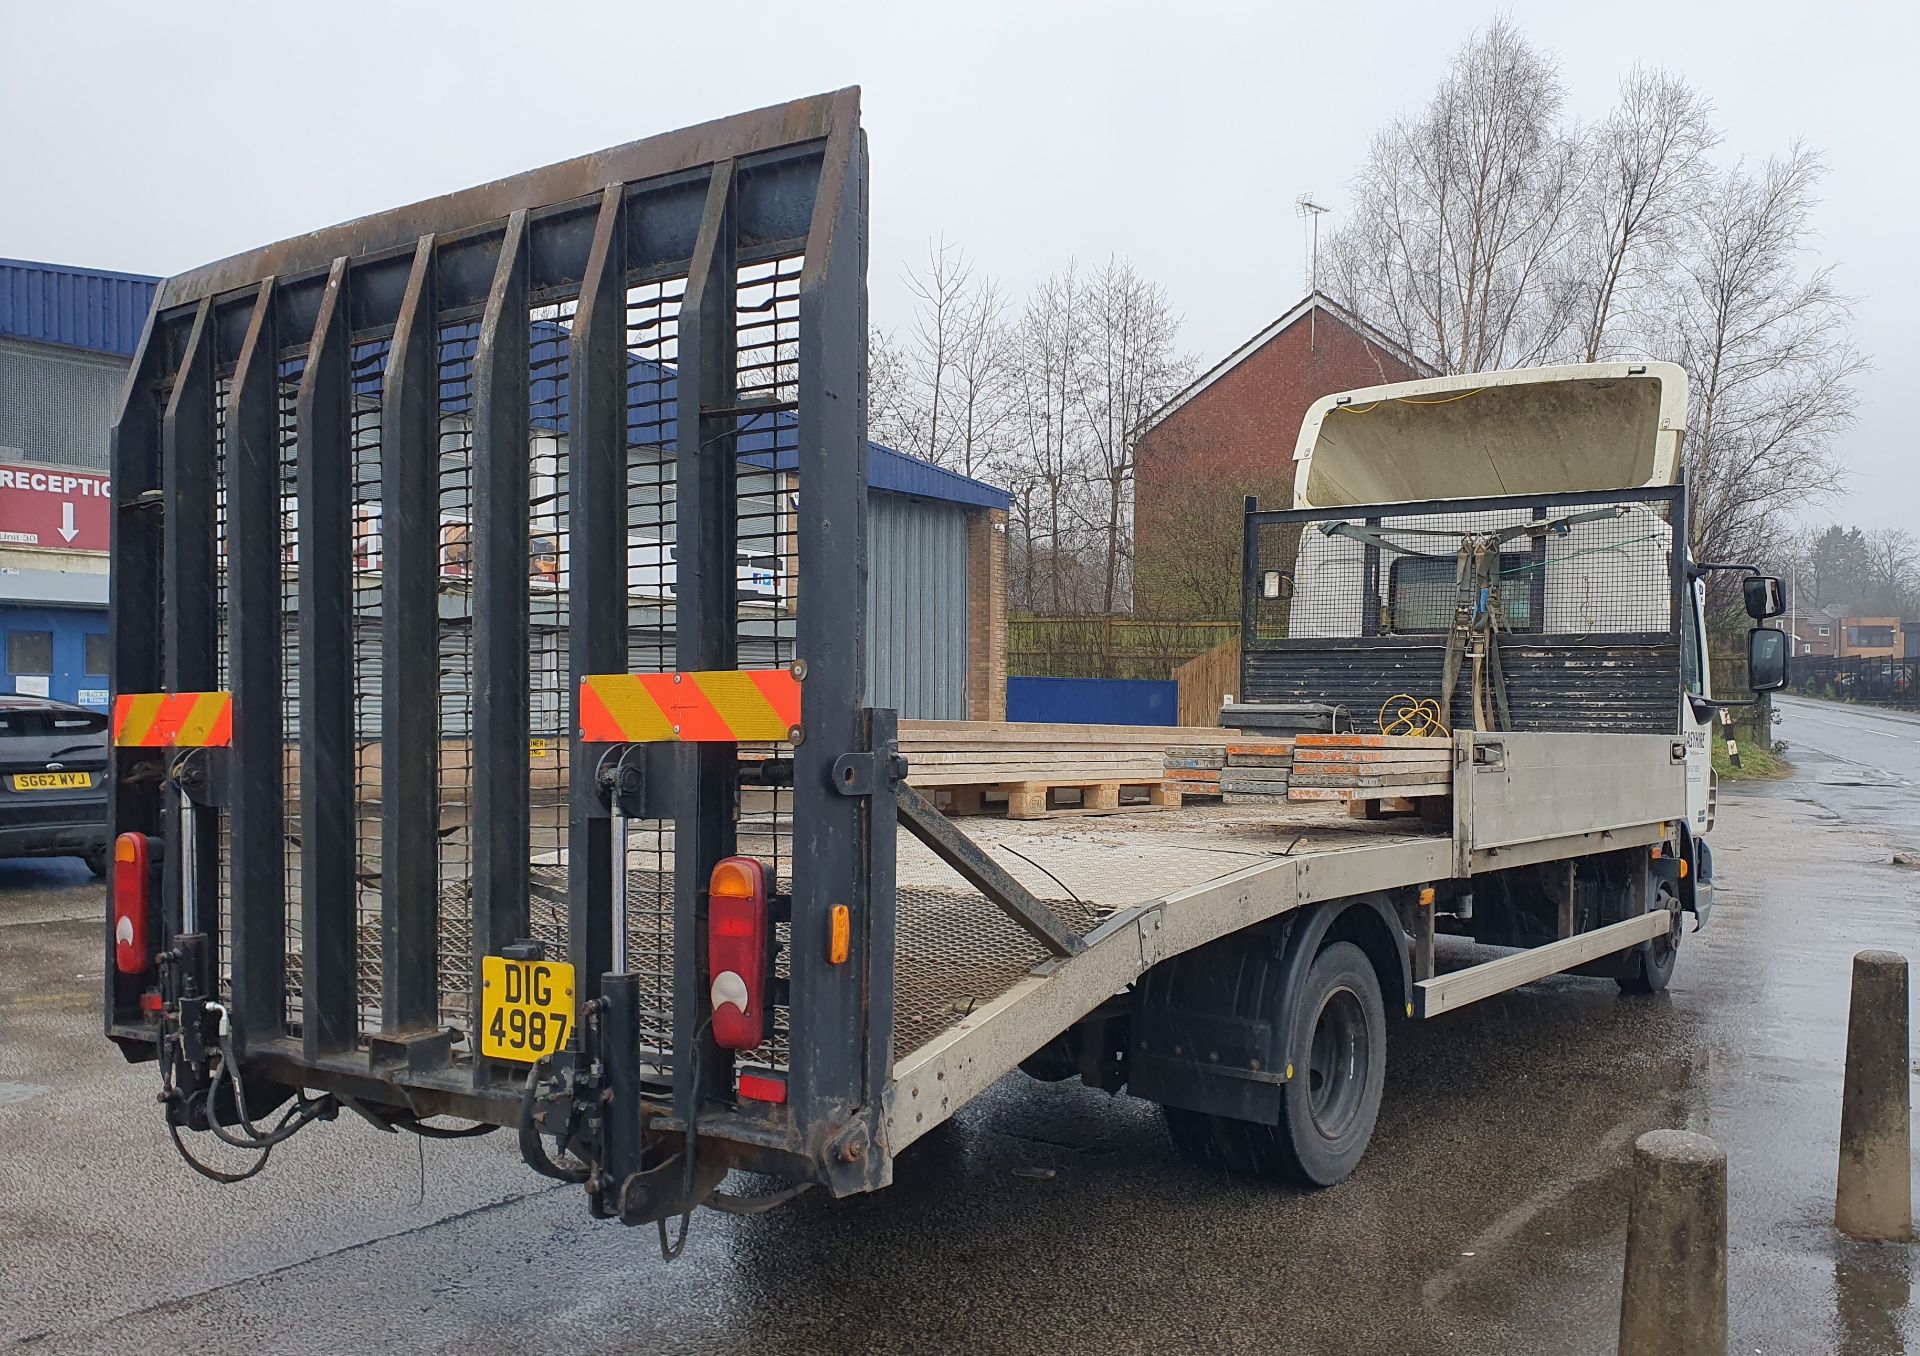 DAF LF 45.160 Flatbed Lorry w/ Loading Ramp & Electric Winch | DIG 4987 | 494,328km - Image 9 of 22